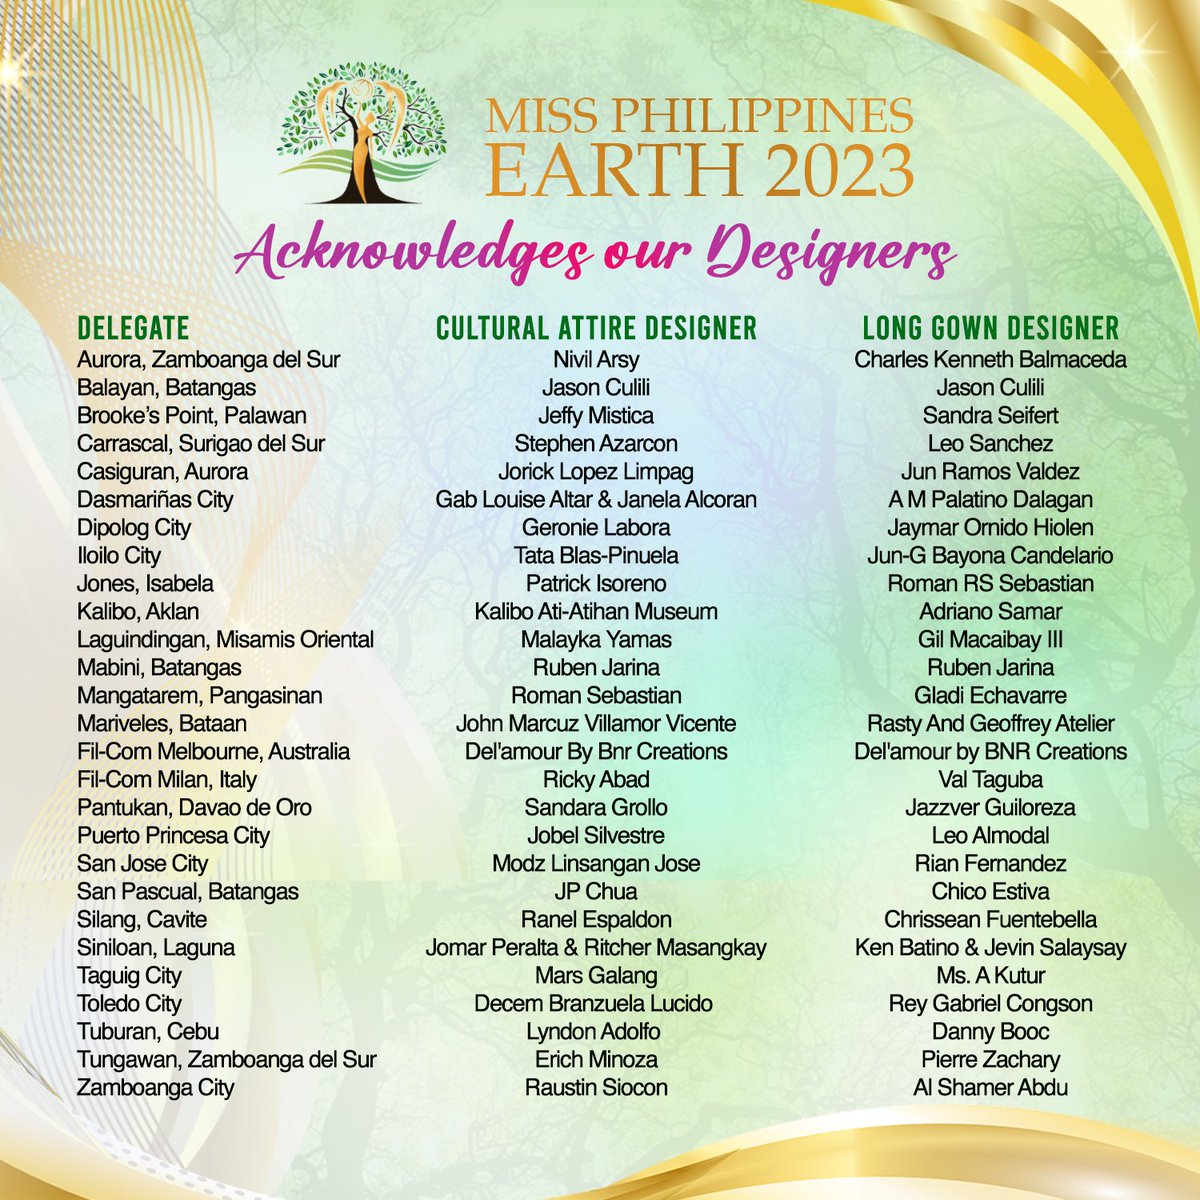 #MissPhilippinesEarth2023 would like to thank and acknowledge the amazing designers for our delegate’s cultural attire and long gowns.